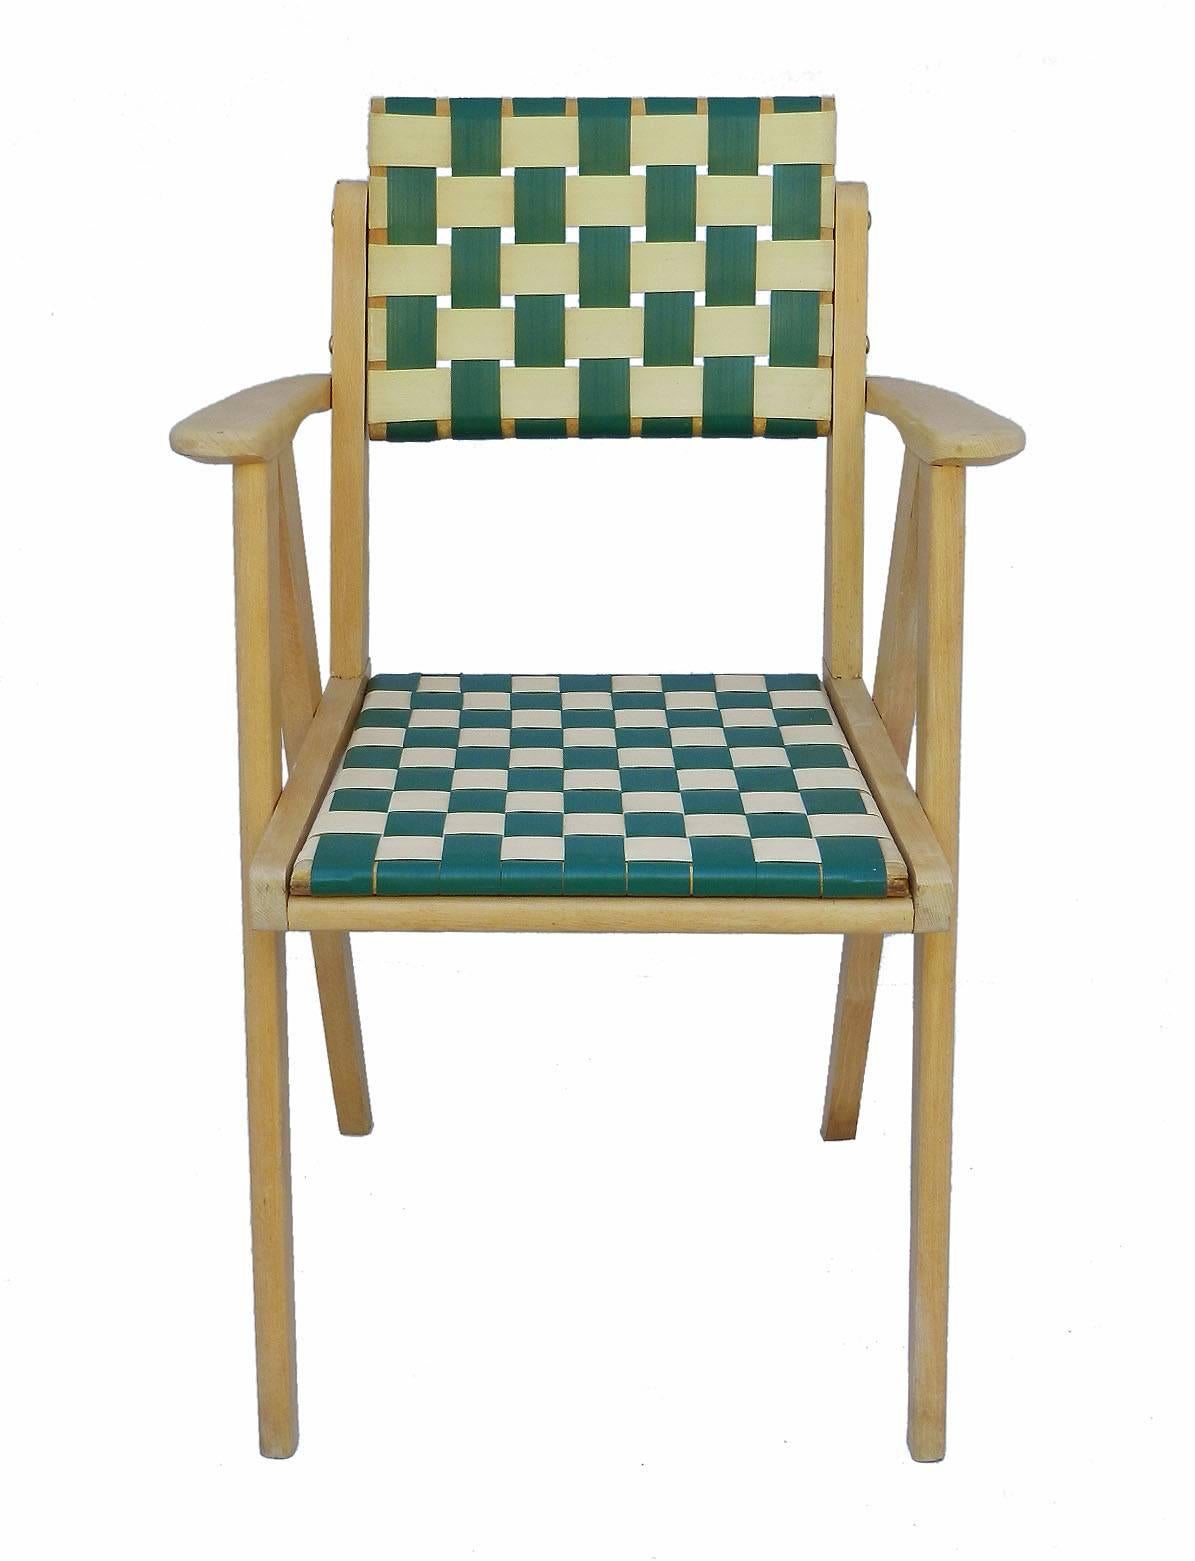 Italian Midcentury Open Armchair Lounge Chair Compass Legs Original Woven Seat and Back